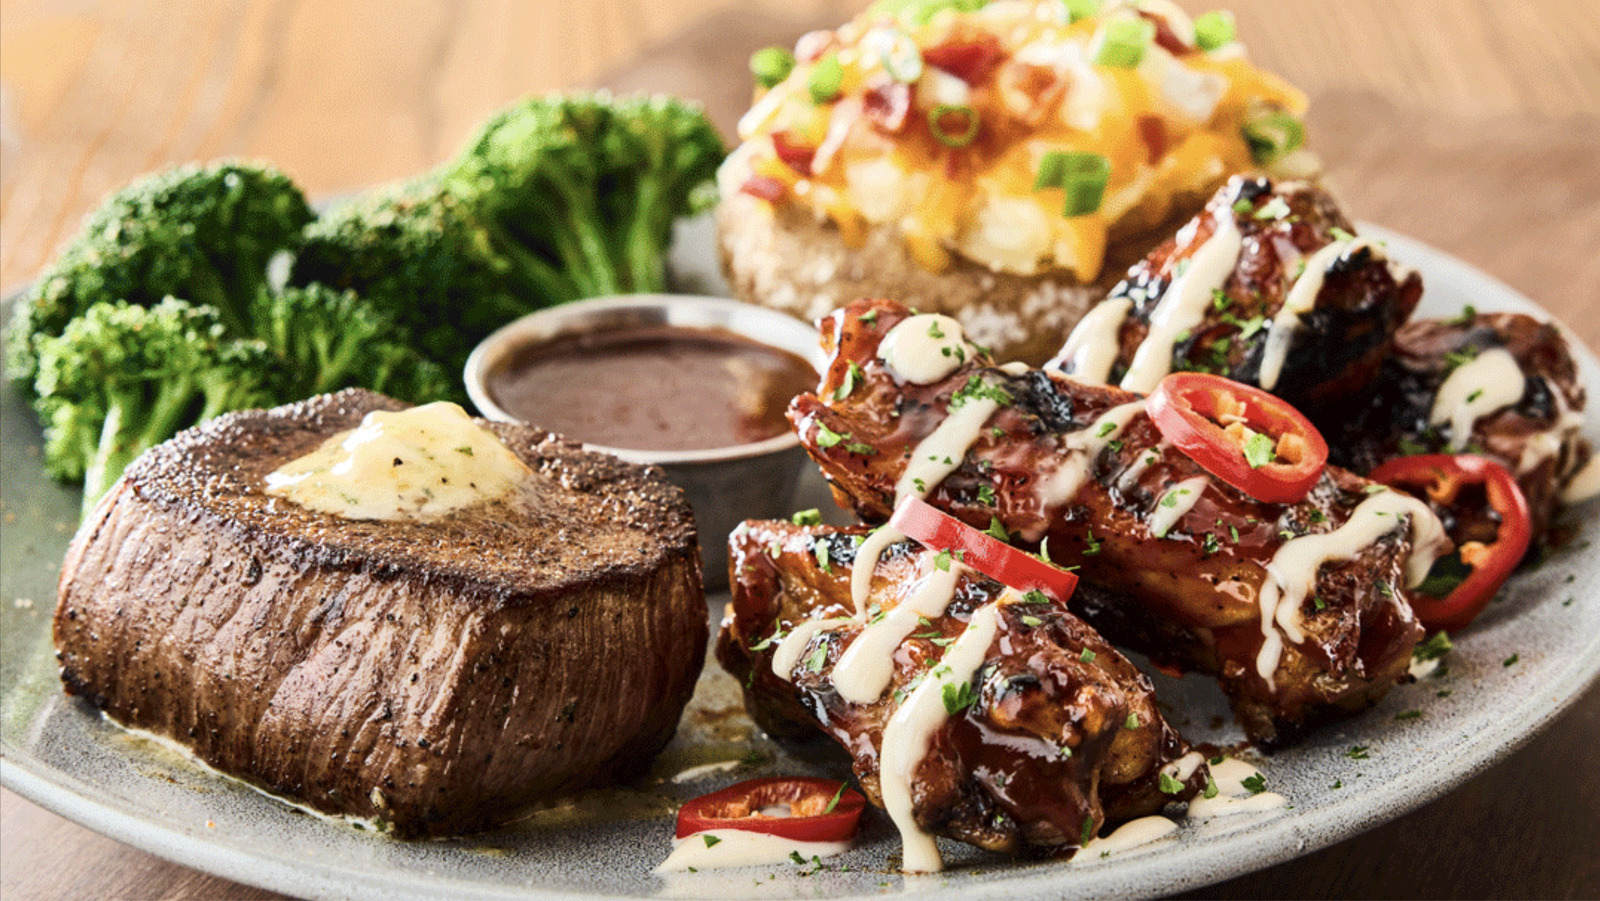 Outback Steakhouse Secret Menu Items You Need To Try